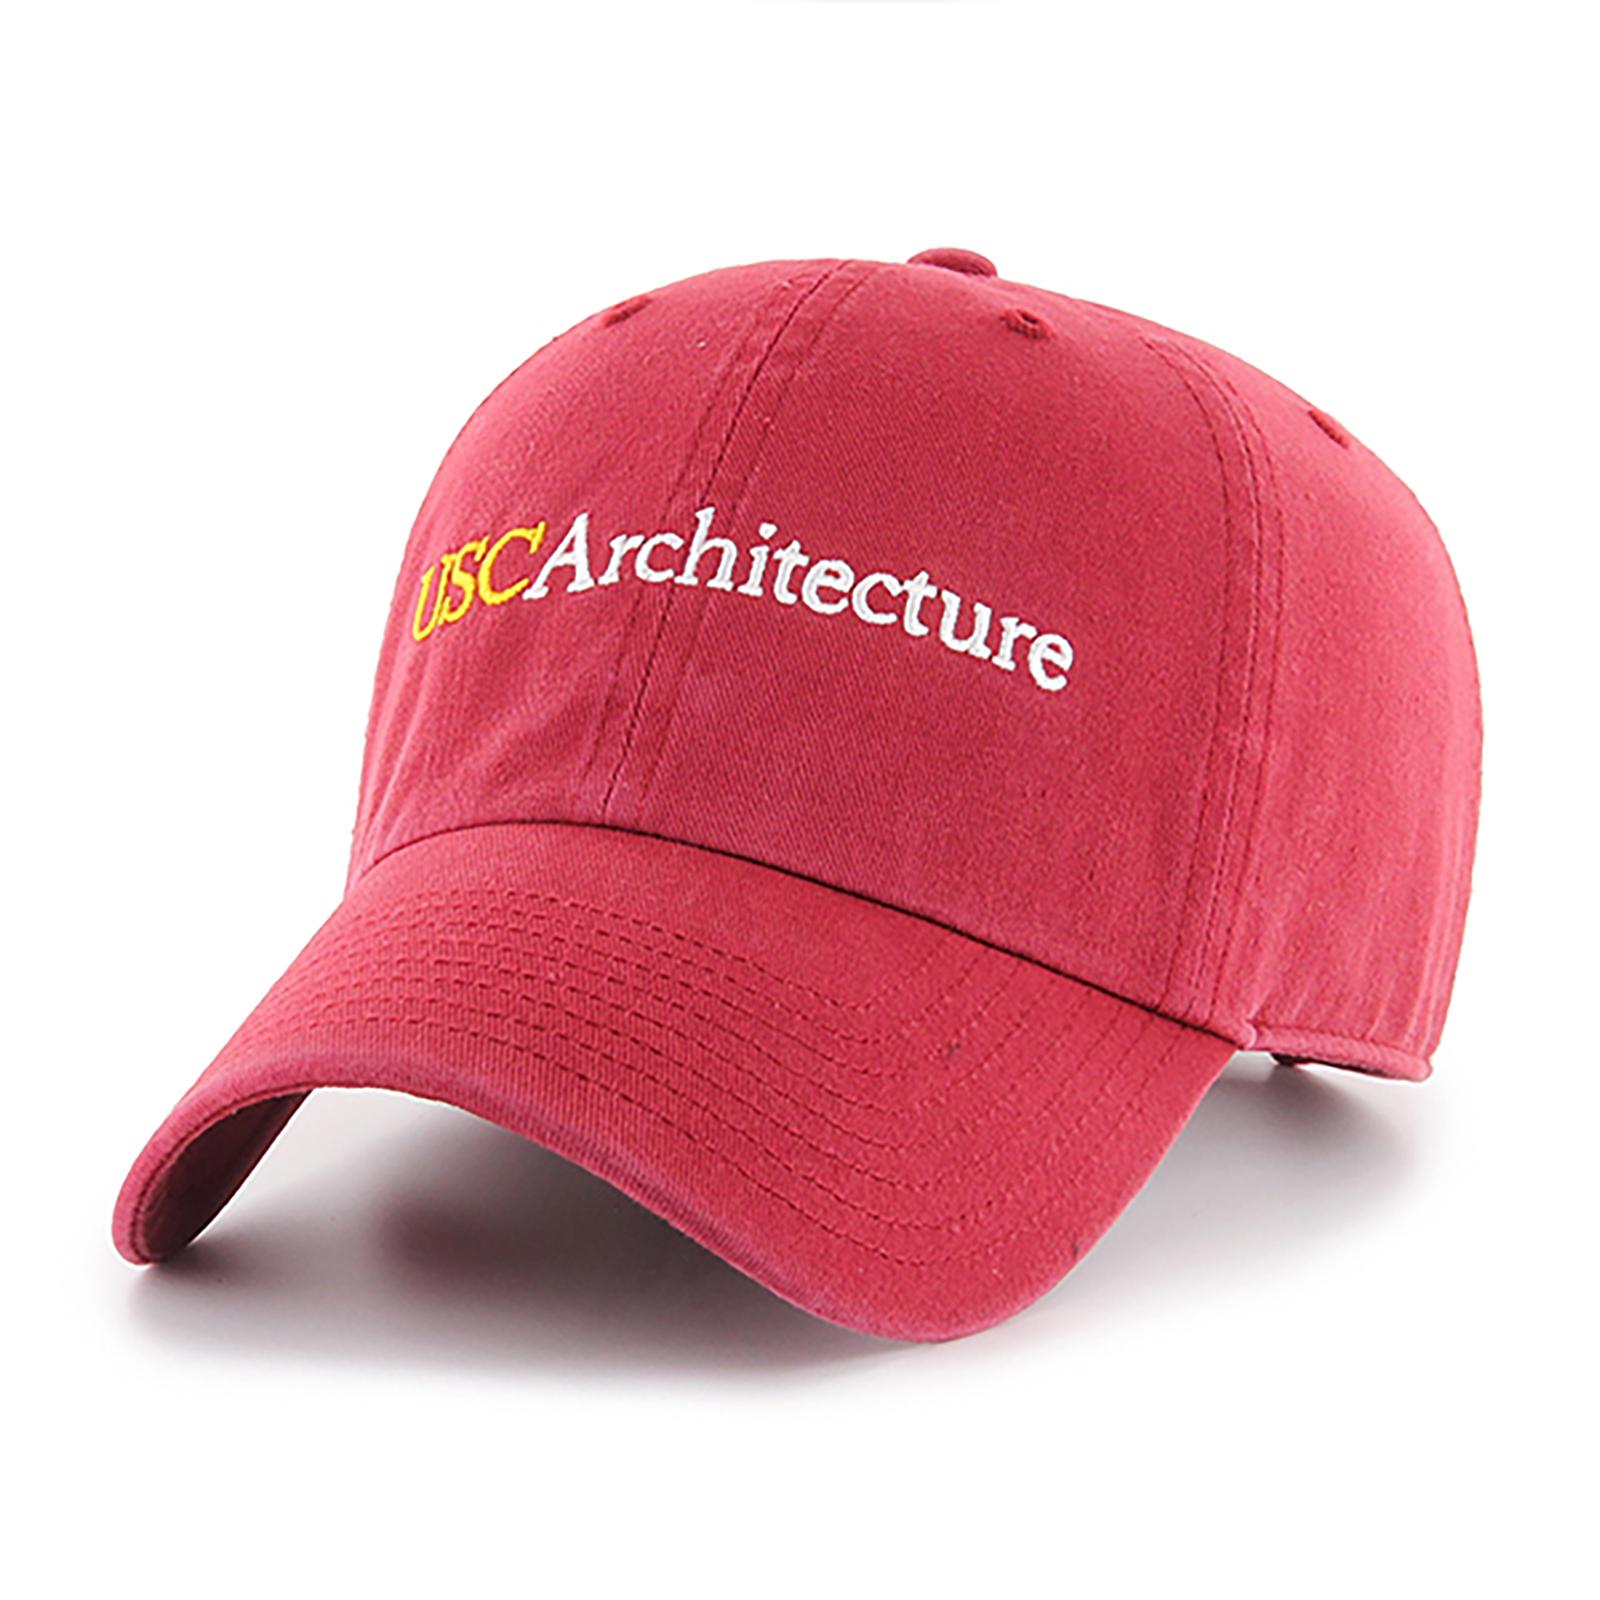 USC School of Architecture Cap Cardinal Fits All image01